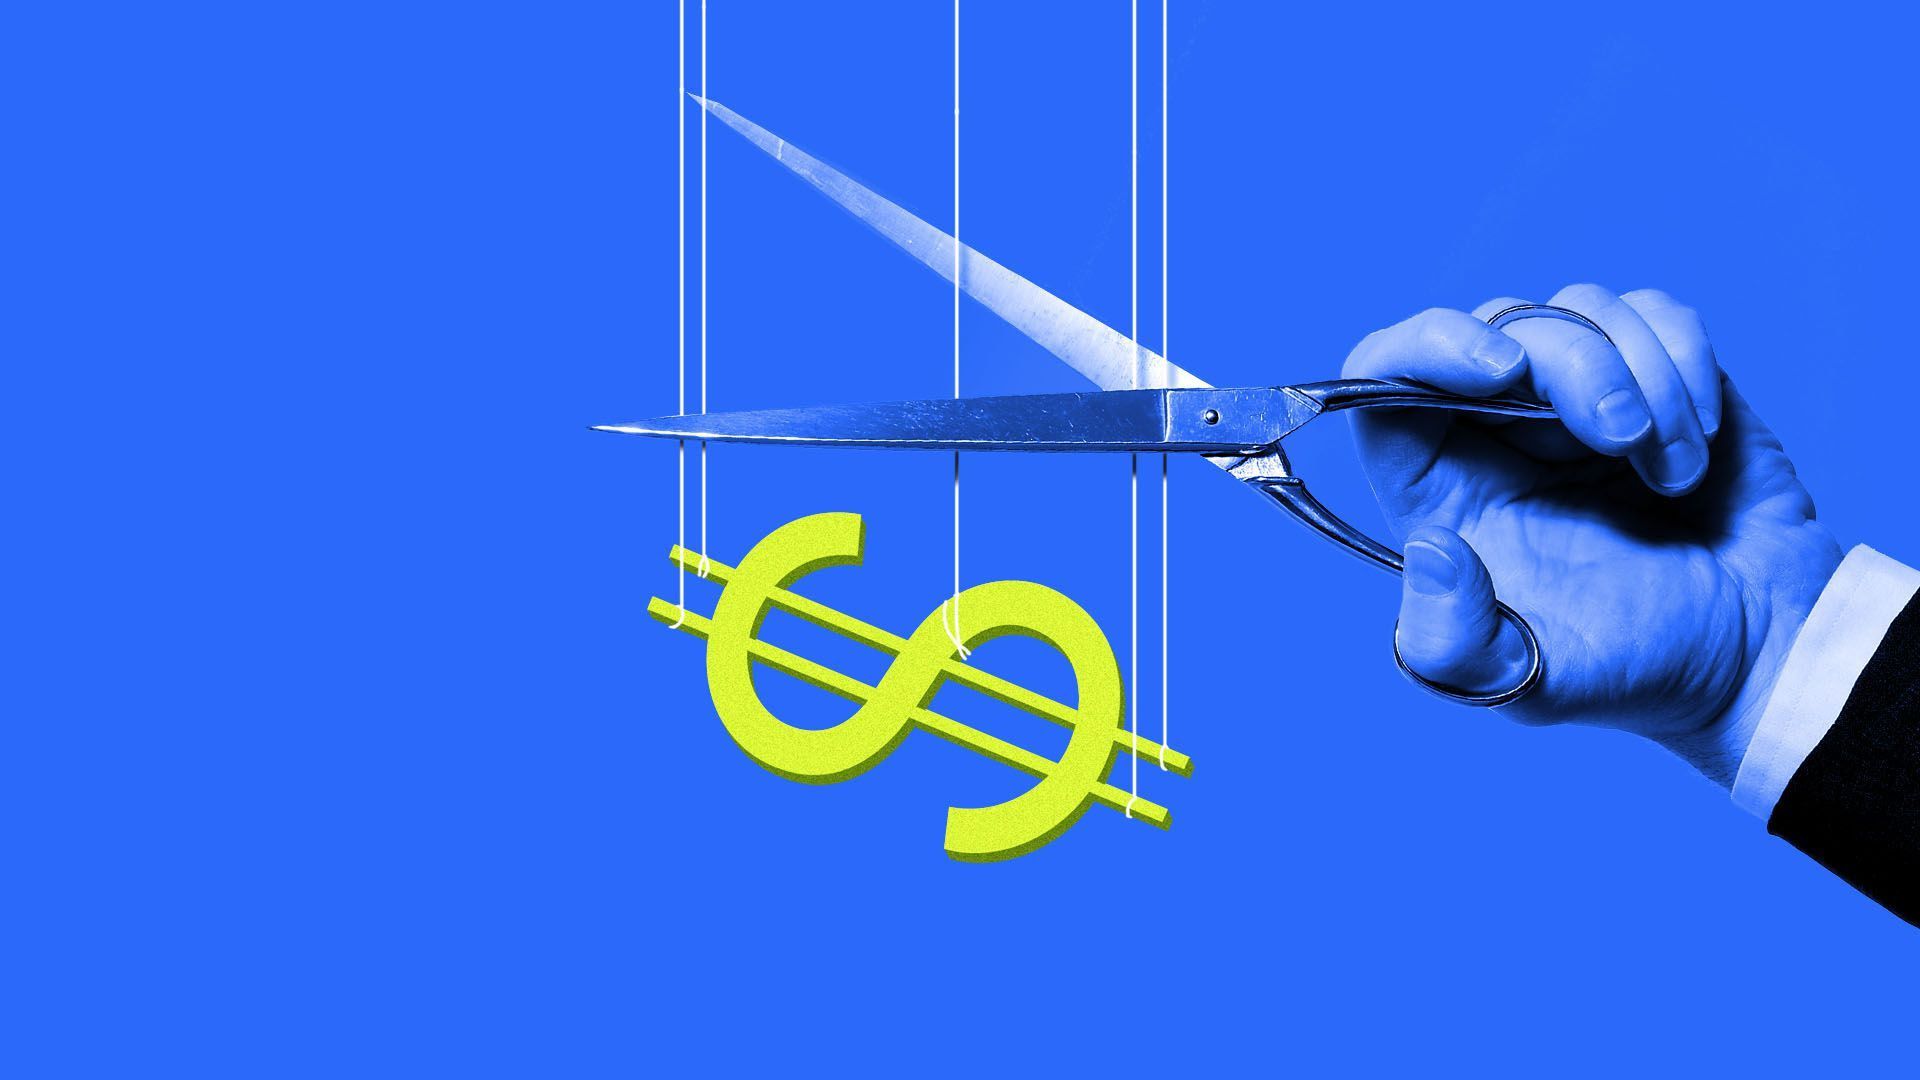 An illustration of someone cutting the strings off a hanging money sign.